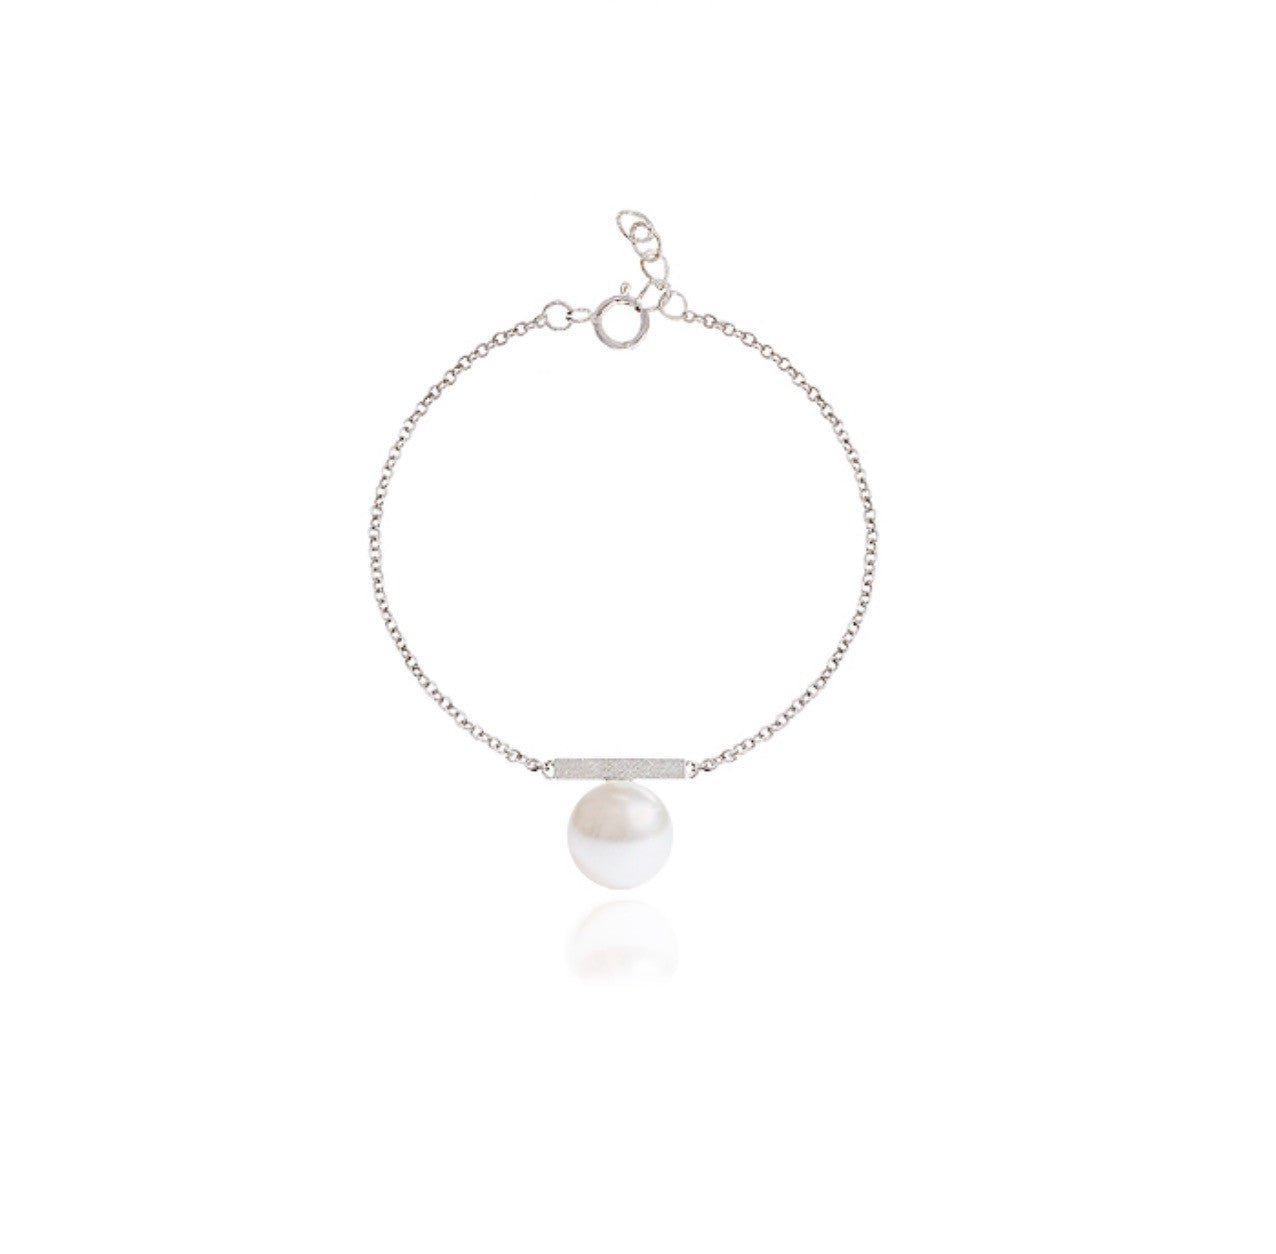 925 sterling silver Tiny square Pipe Bar with Pearl Pendant bracelet